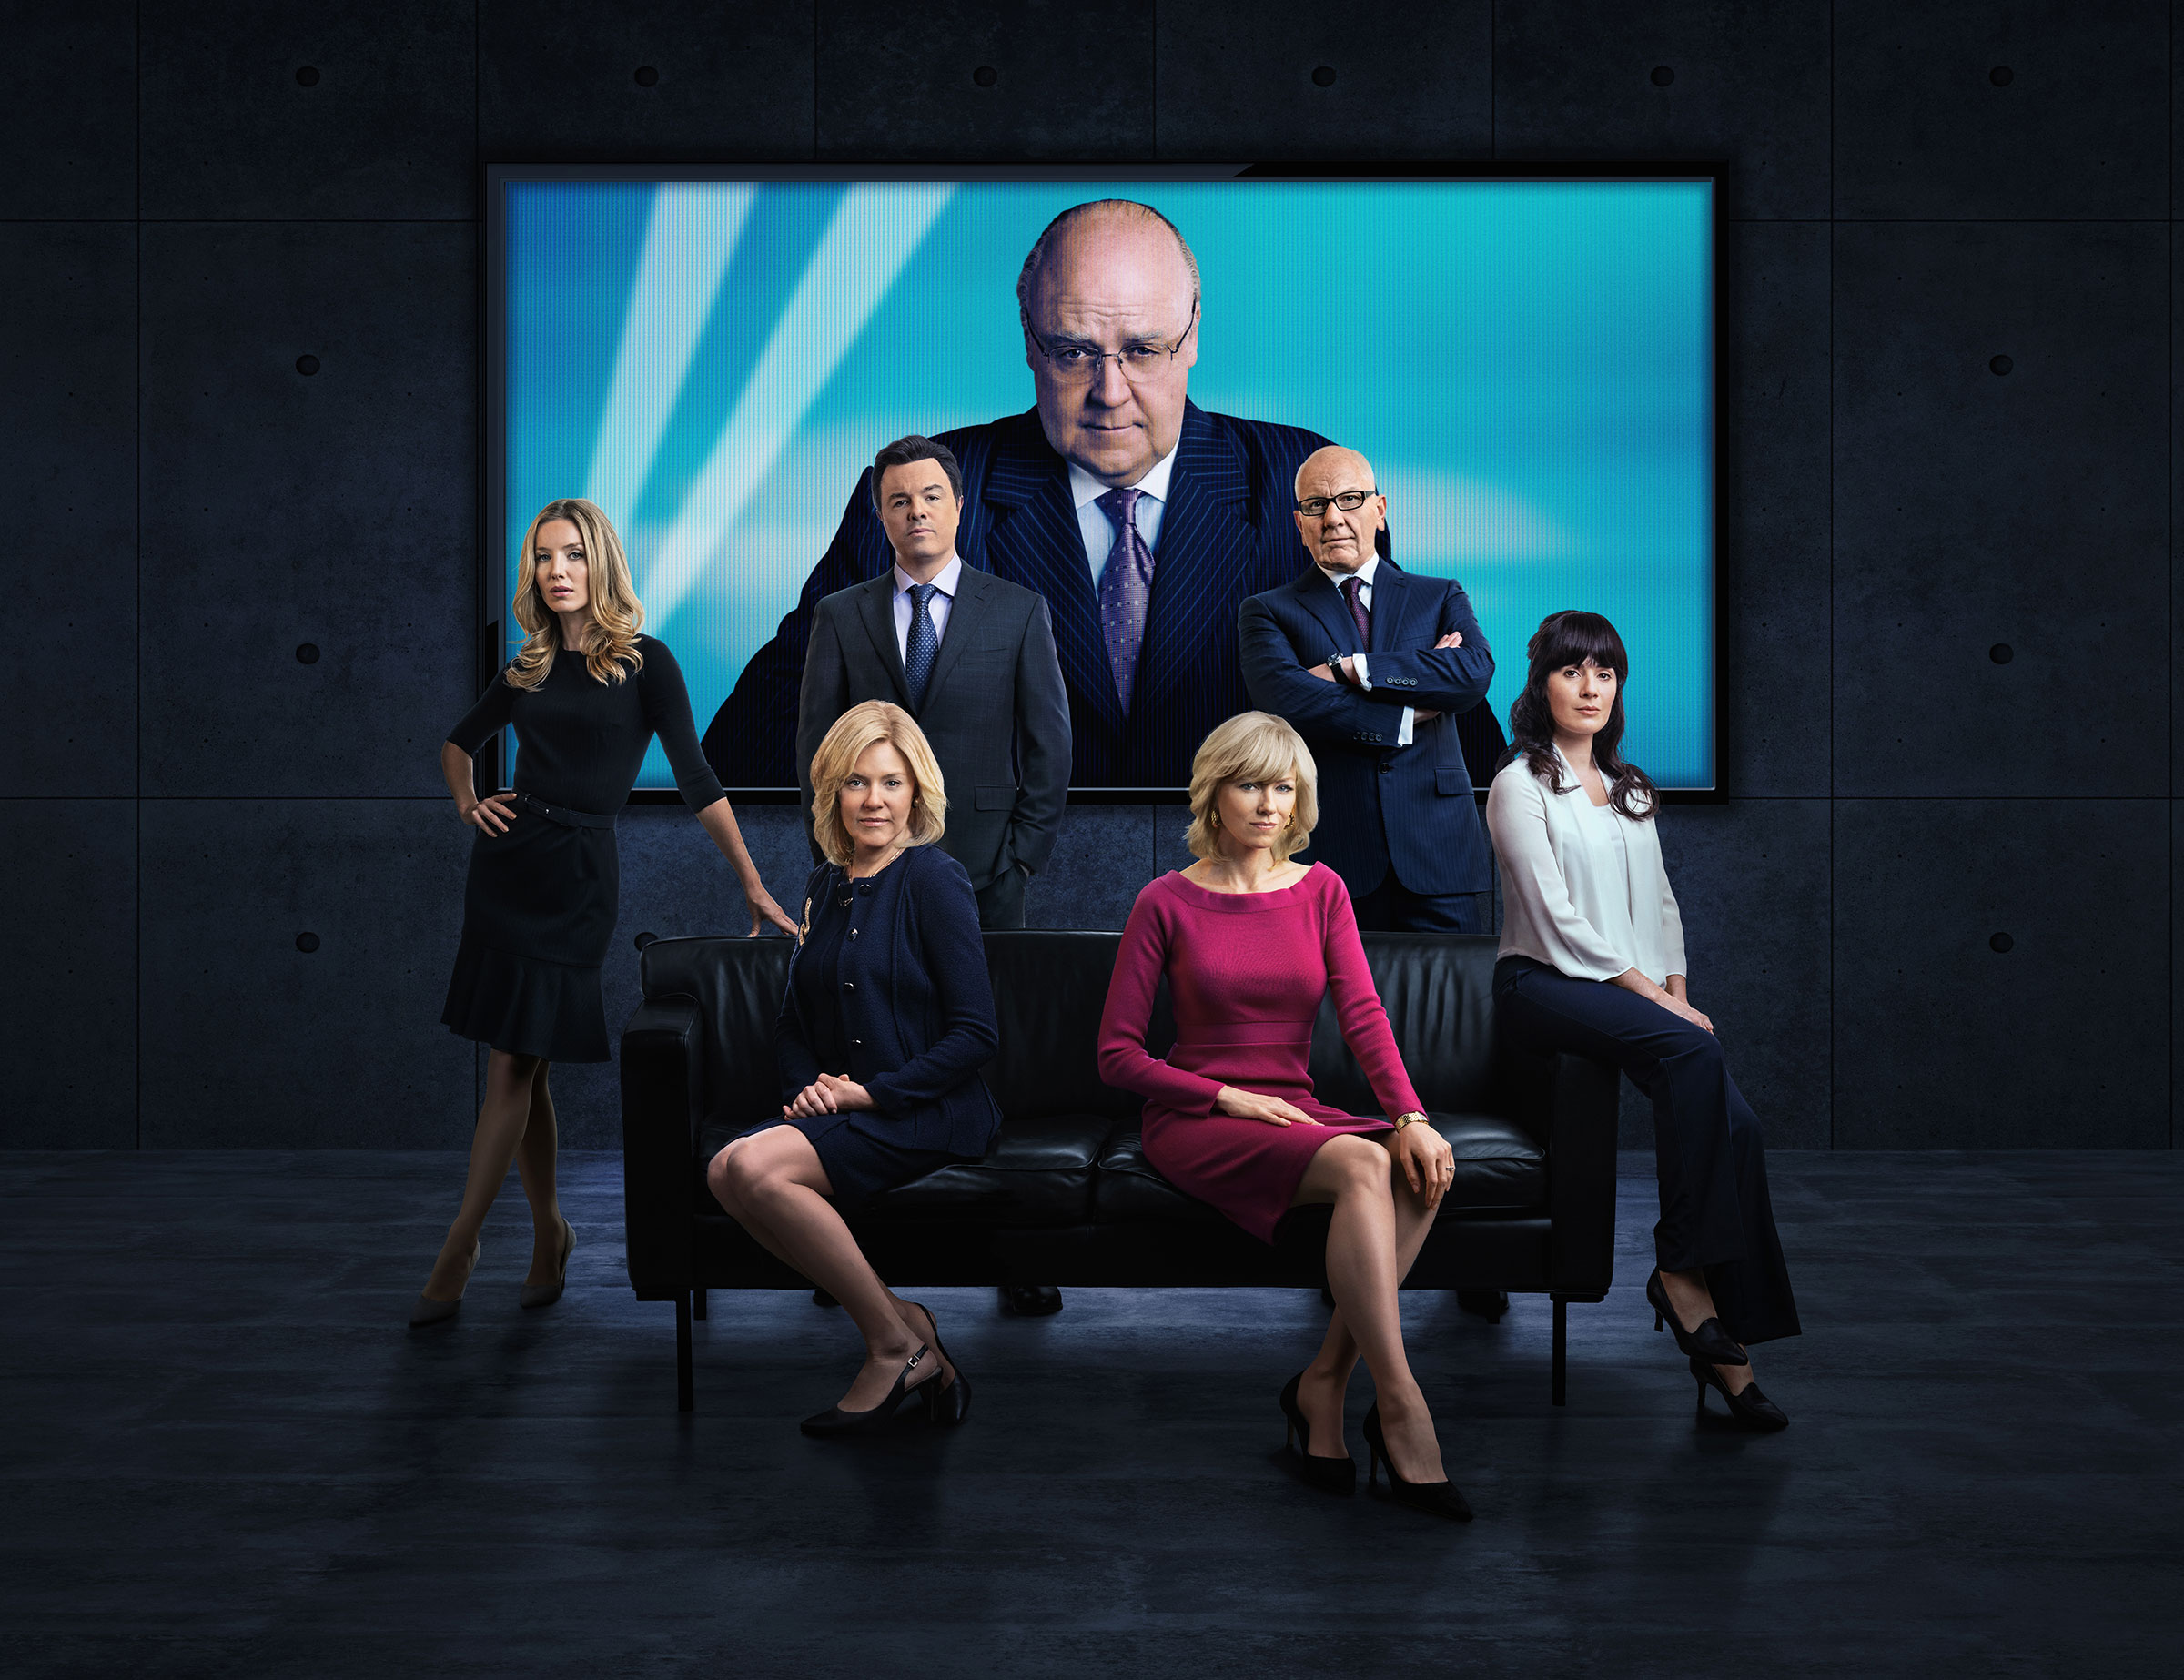 Clockwise from left: Annabelle Wallis as Laurie Luhn, Seth MacFarlane as Brian Lewis, Sienna Miller as Elizabeth Ailes, Russell Crowe as Roger Ailes, Naomi Watts as Gretchen Carlson, Simon McBurney as Rupert Murdoch and Aleksa Palladino as Judy Laterza in The Loudest Voice.